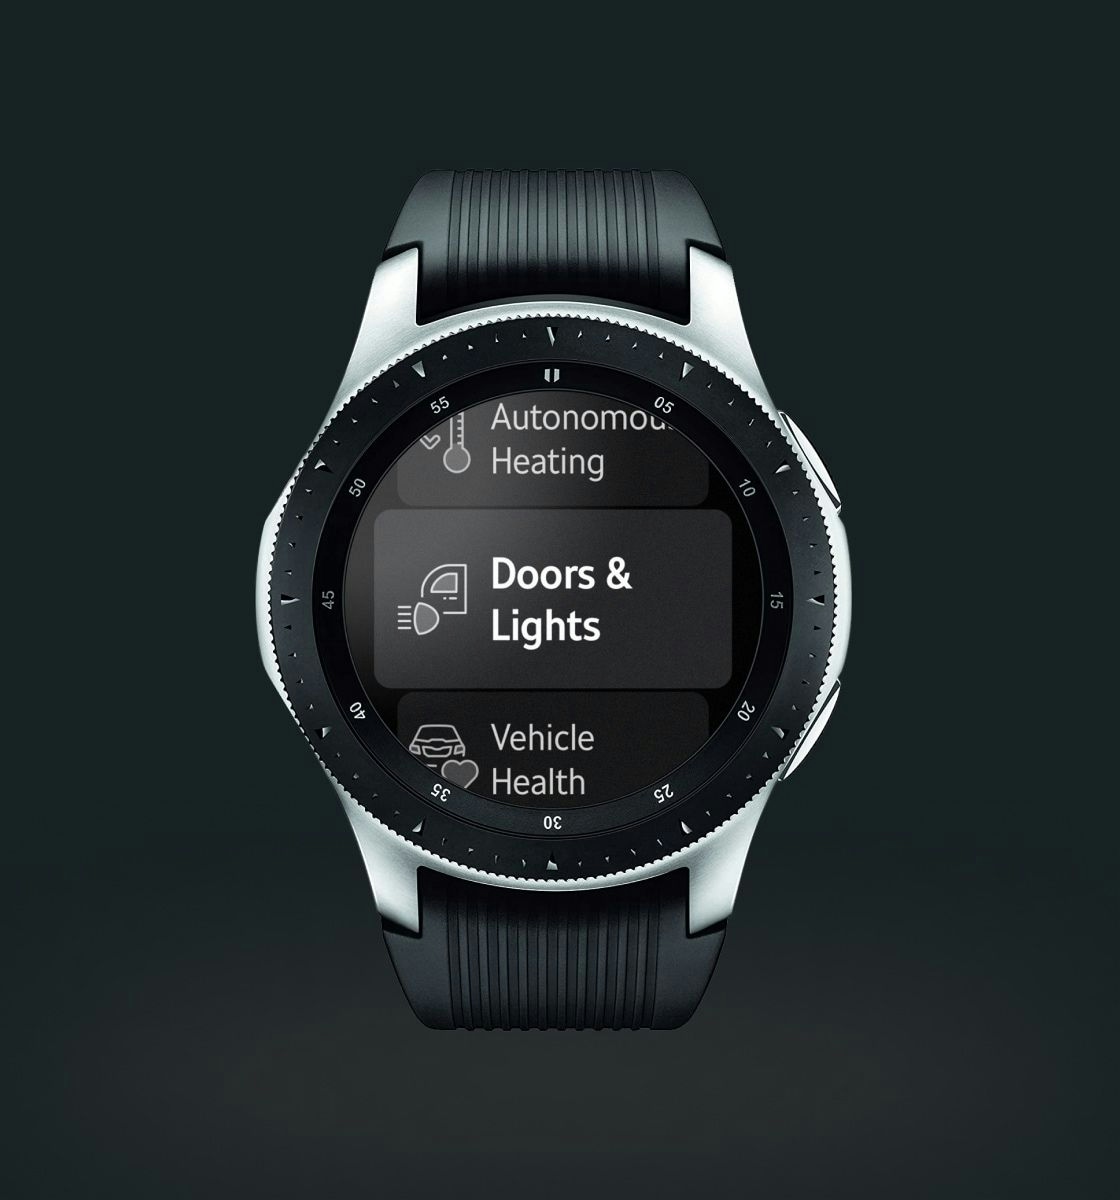 Finally, a robust app for drivers with a Tizen watch